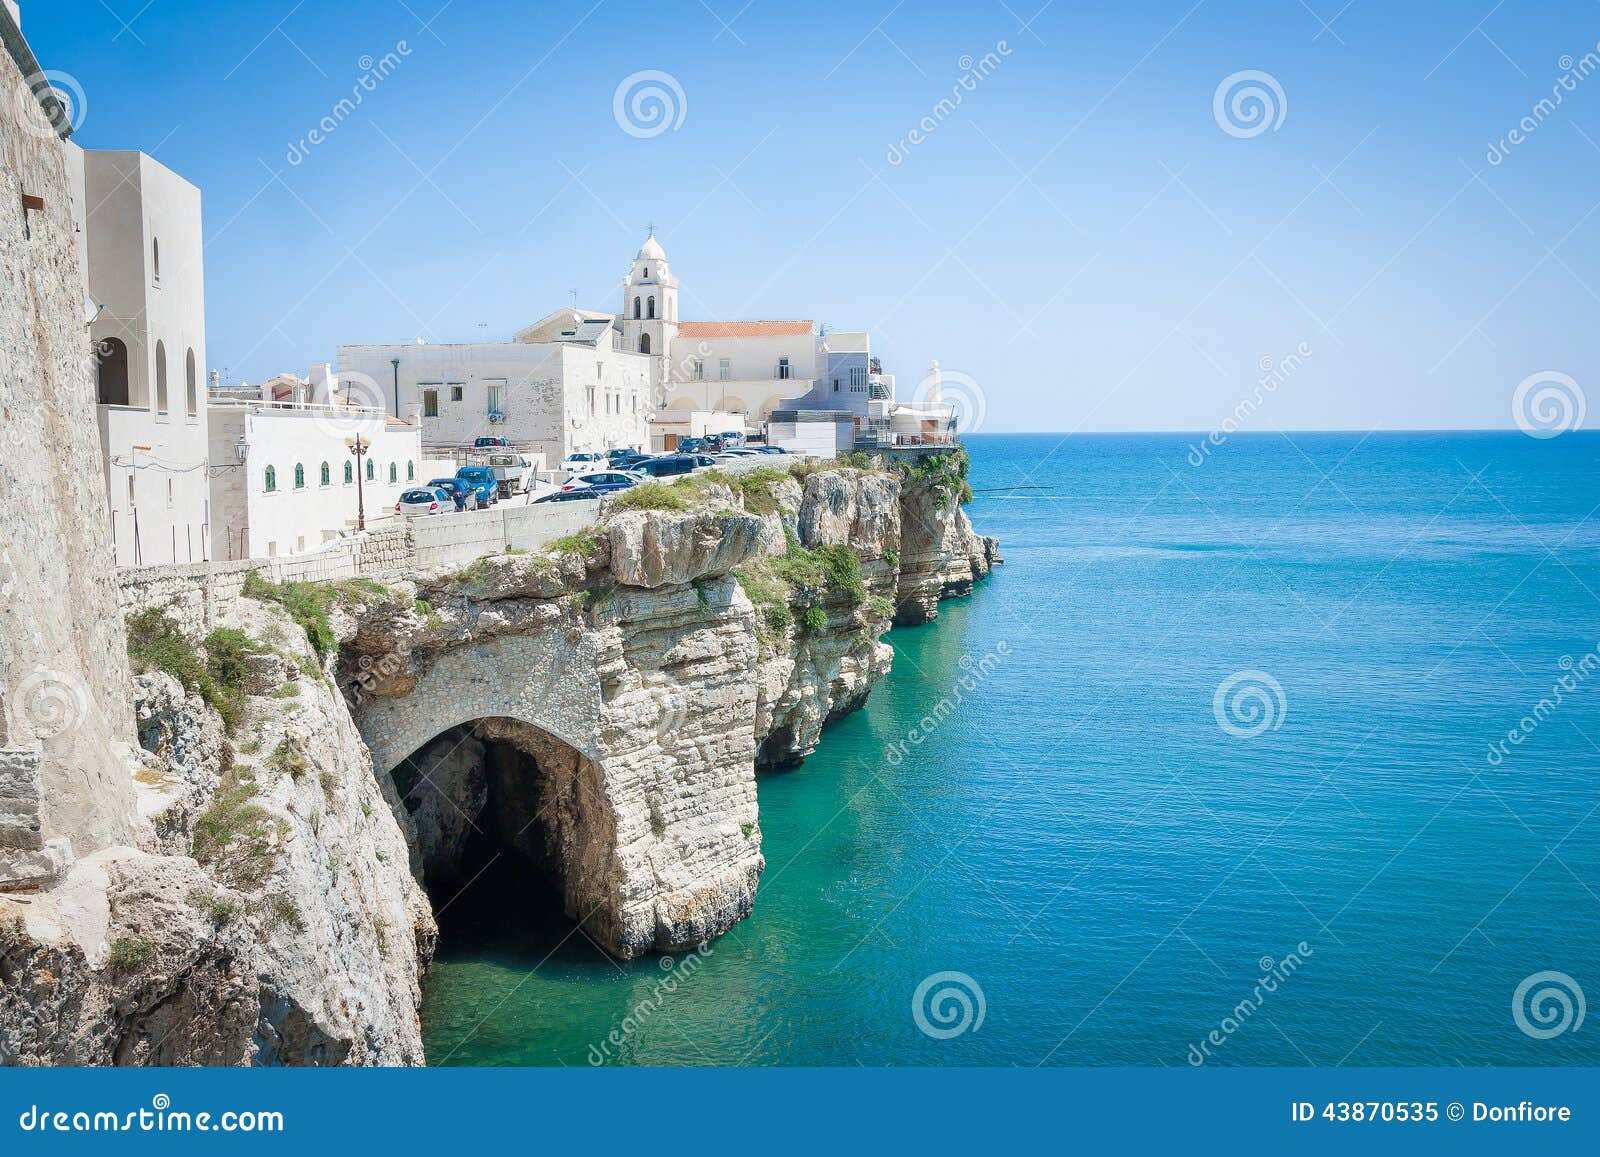 church in front of adriatic sea in the vieste italy